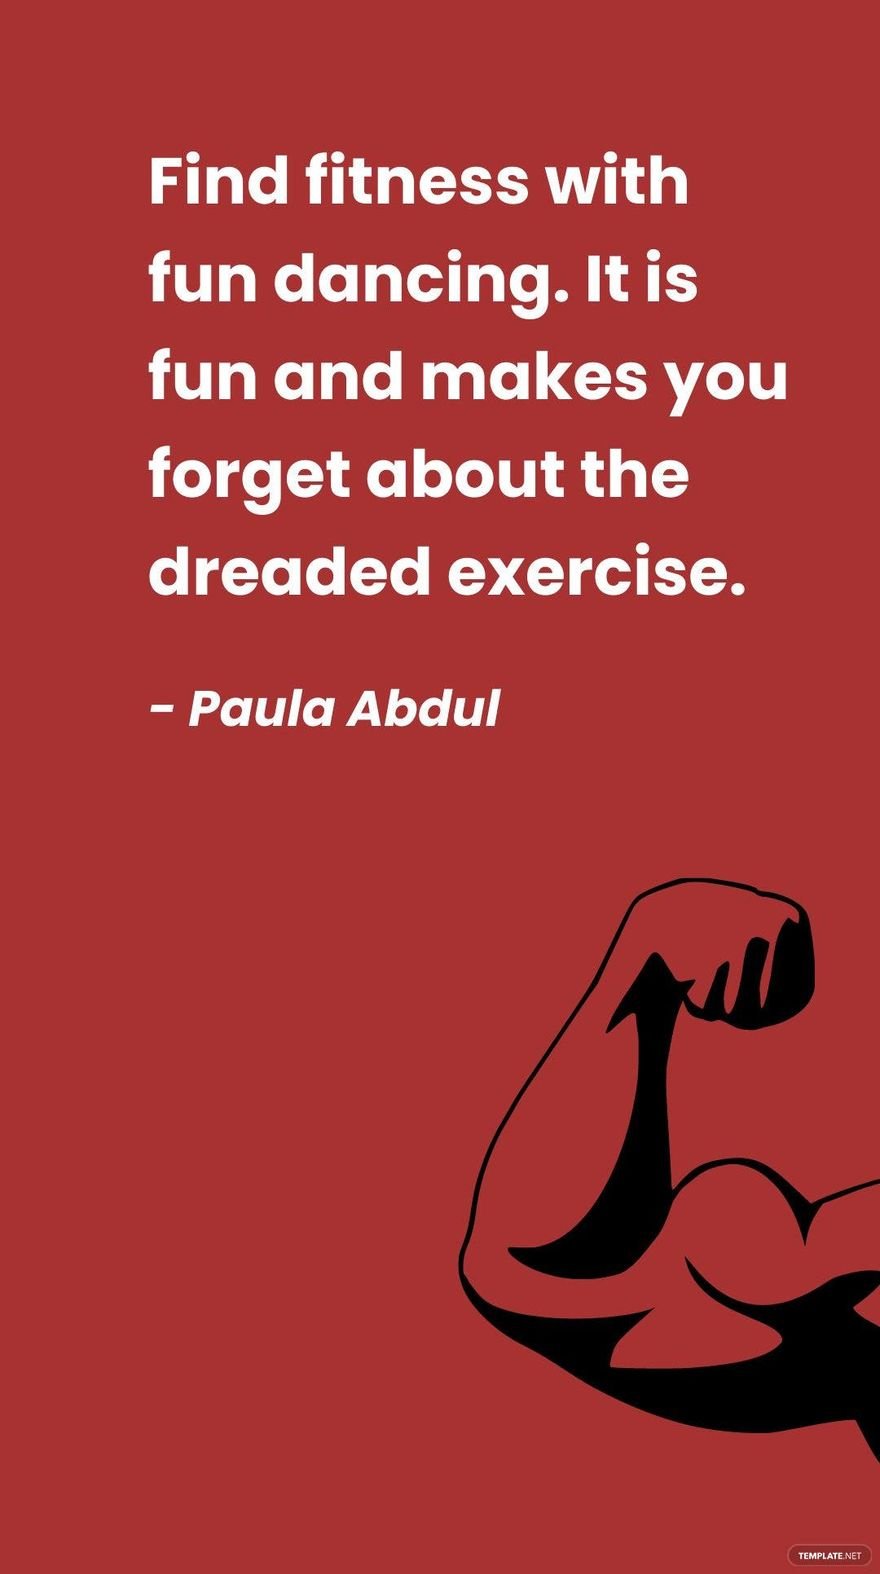 Free Paula Abdul - Find fitness with fun dancing. It is fun and makes you forget about the dreaded exercise. - Paula Abdul in JPG